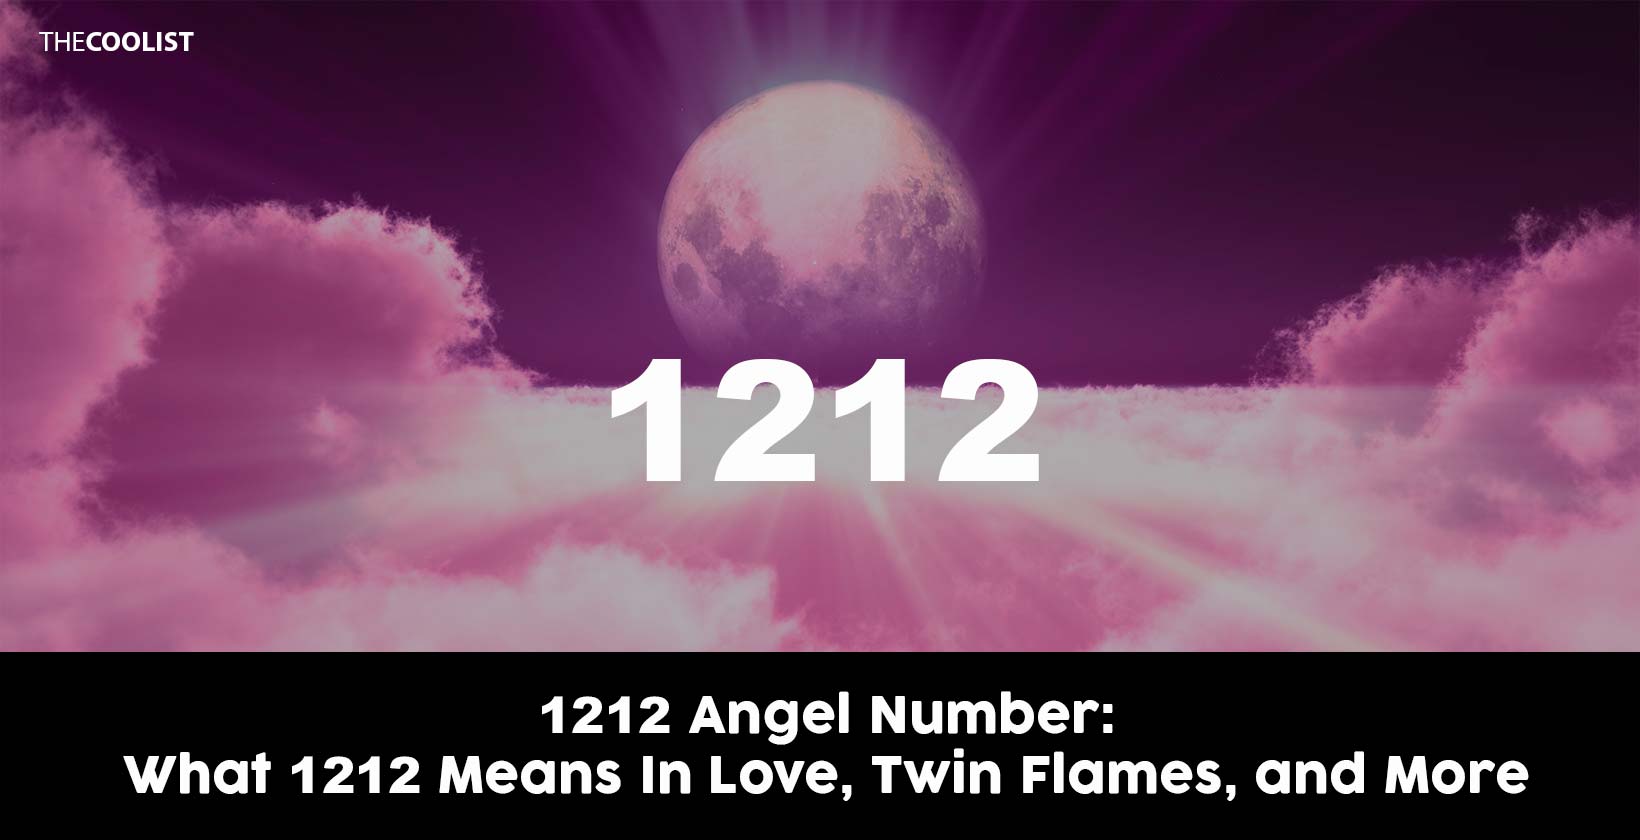 1212 Angel Number: What 1212 Means In Love, Twin Flames, and More